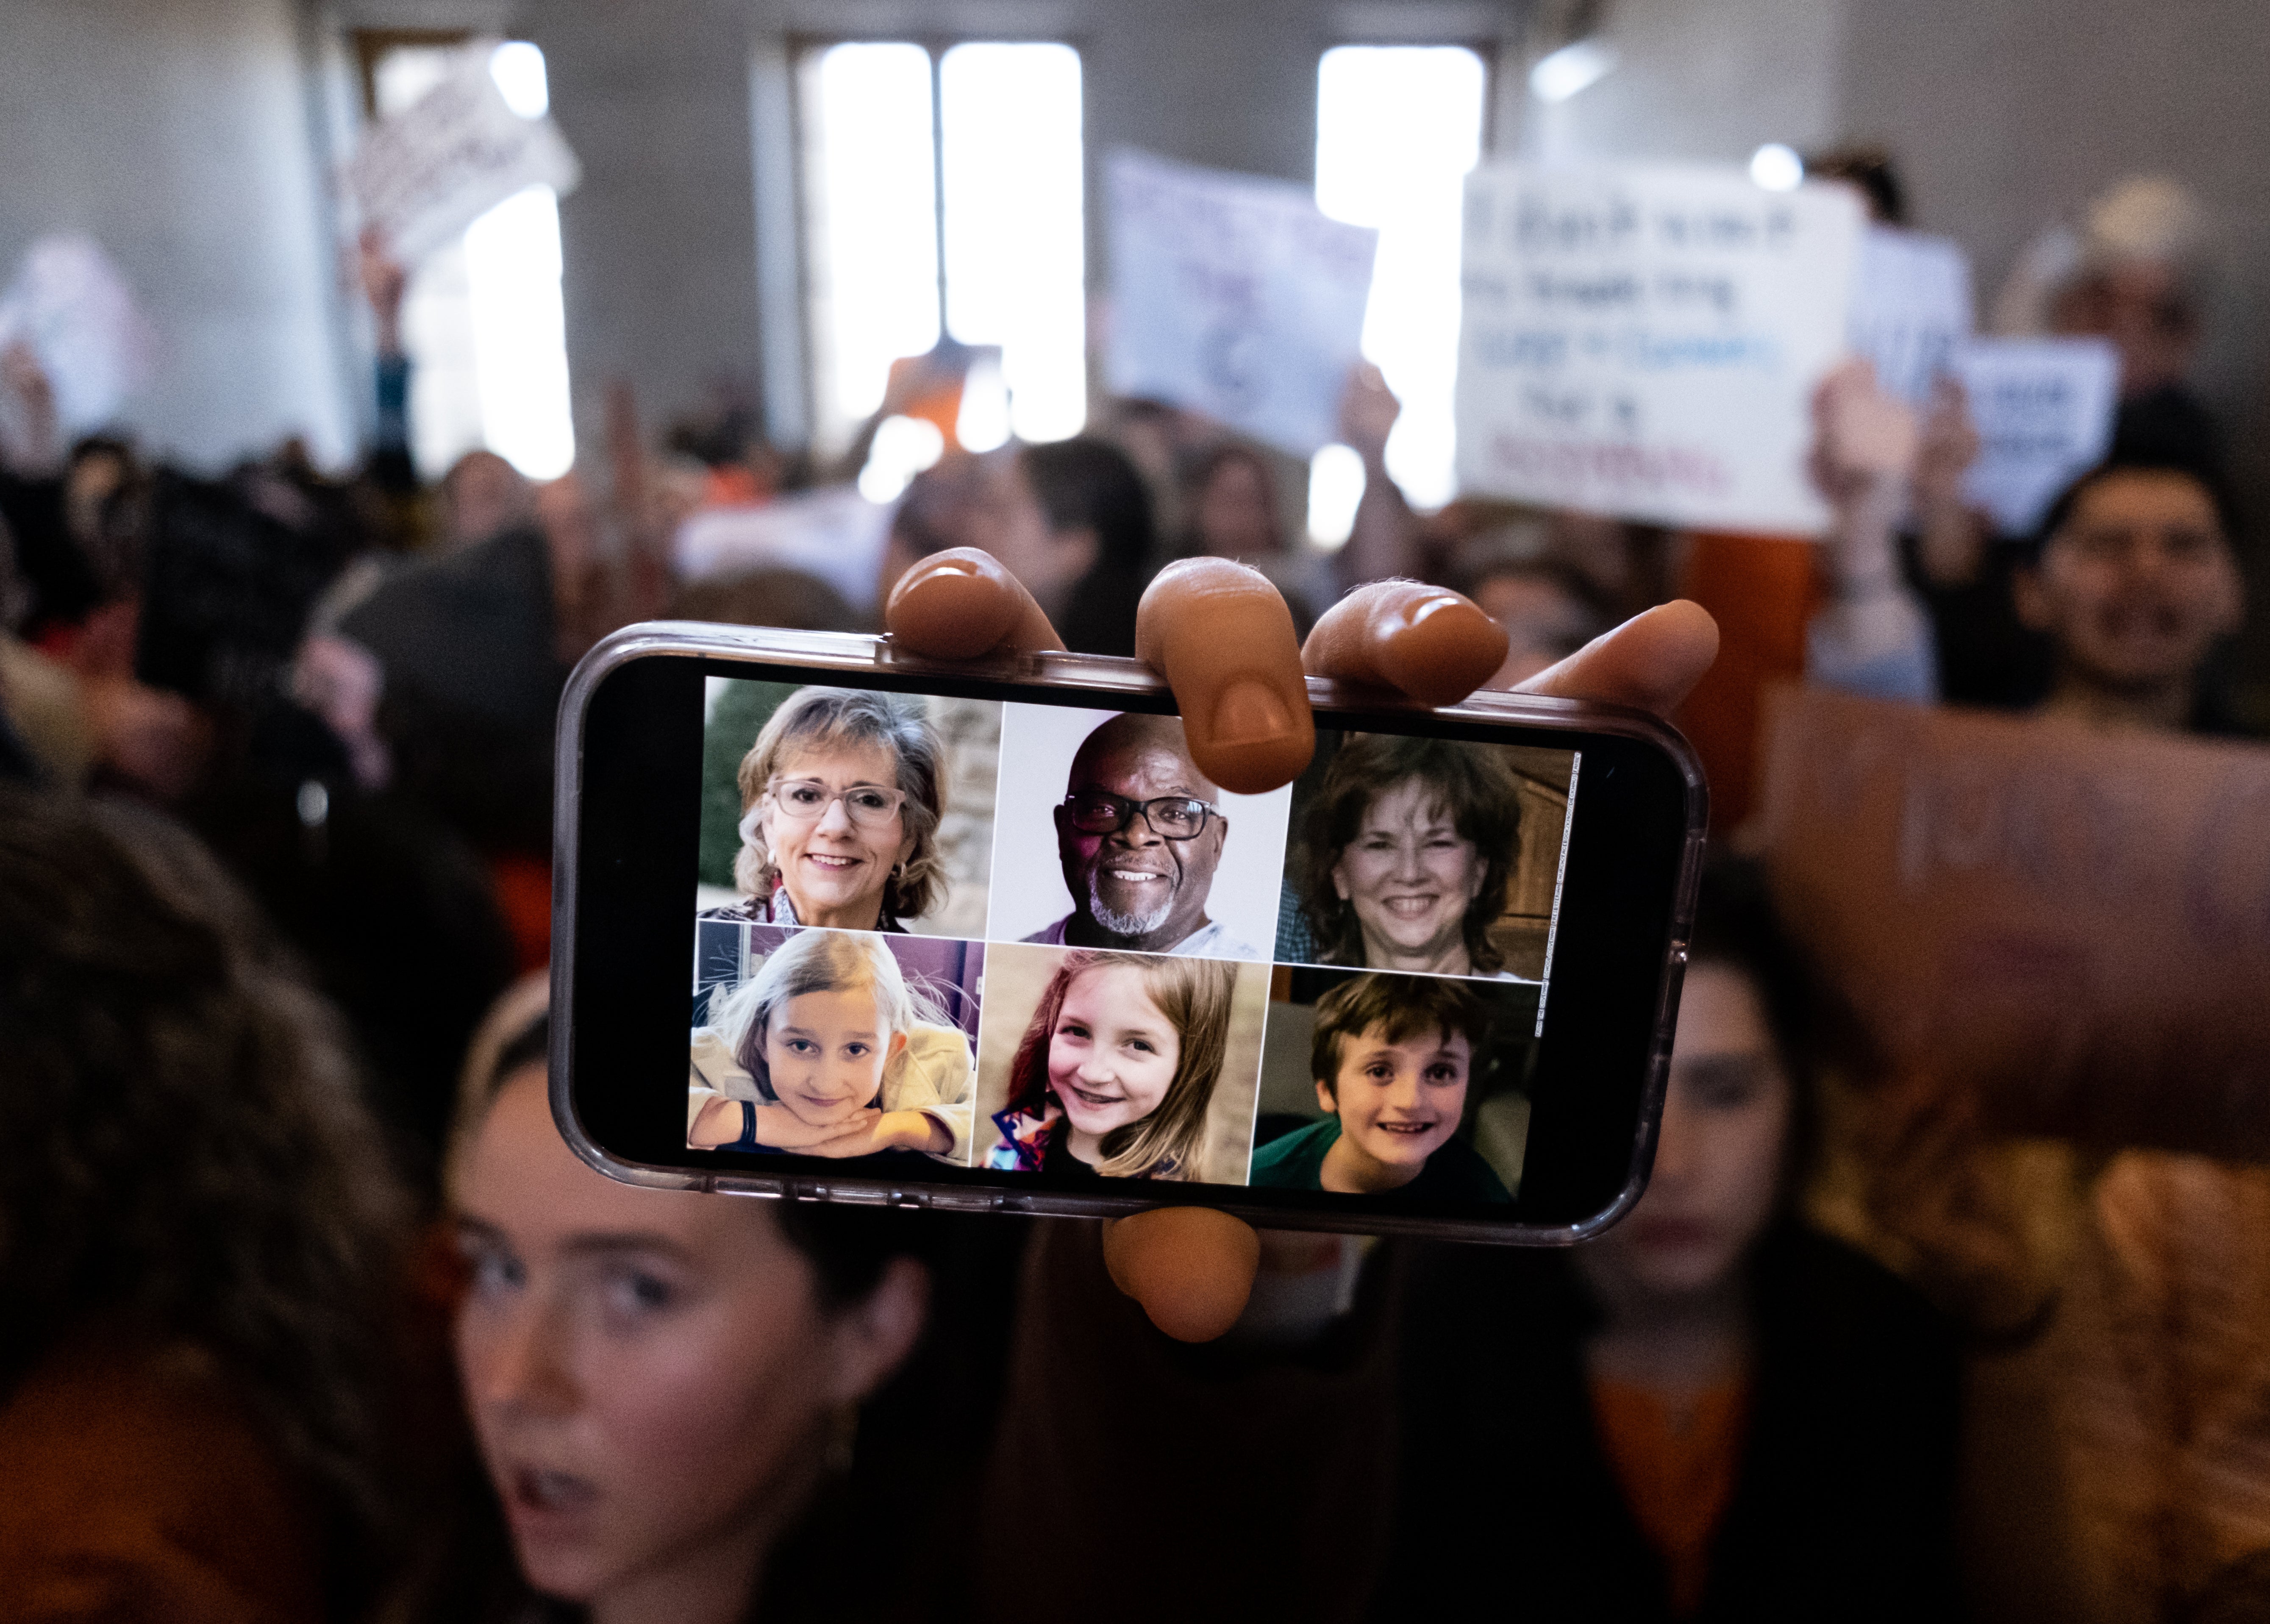 A demonstrator displays a picture of the victims of the Covenant School shooting on their phone inside the Tennessee State Capitol during a protest against gun violence on 30 March.